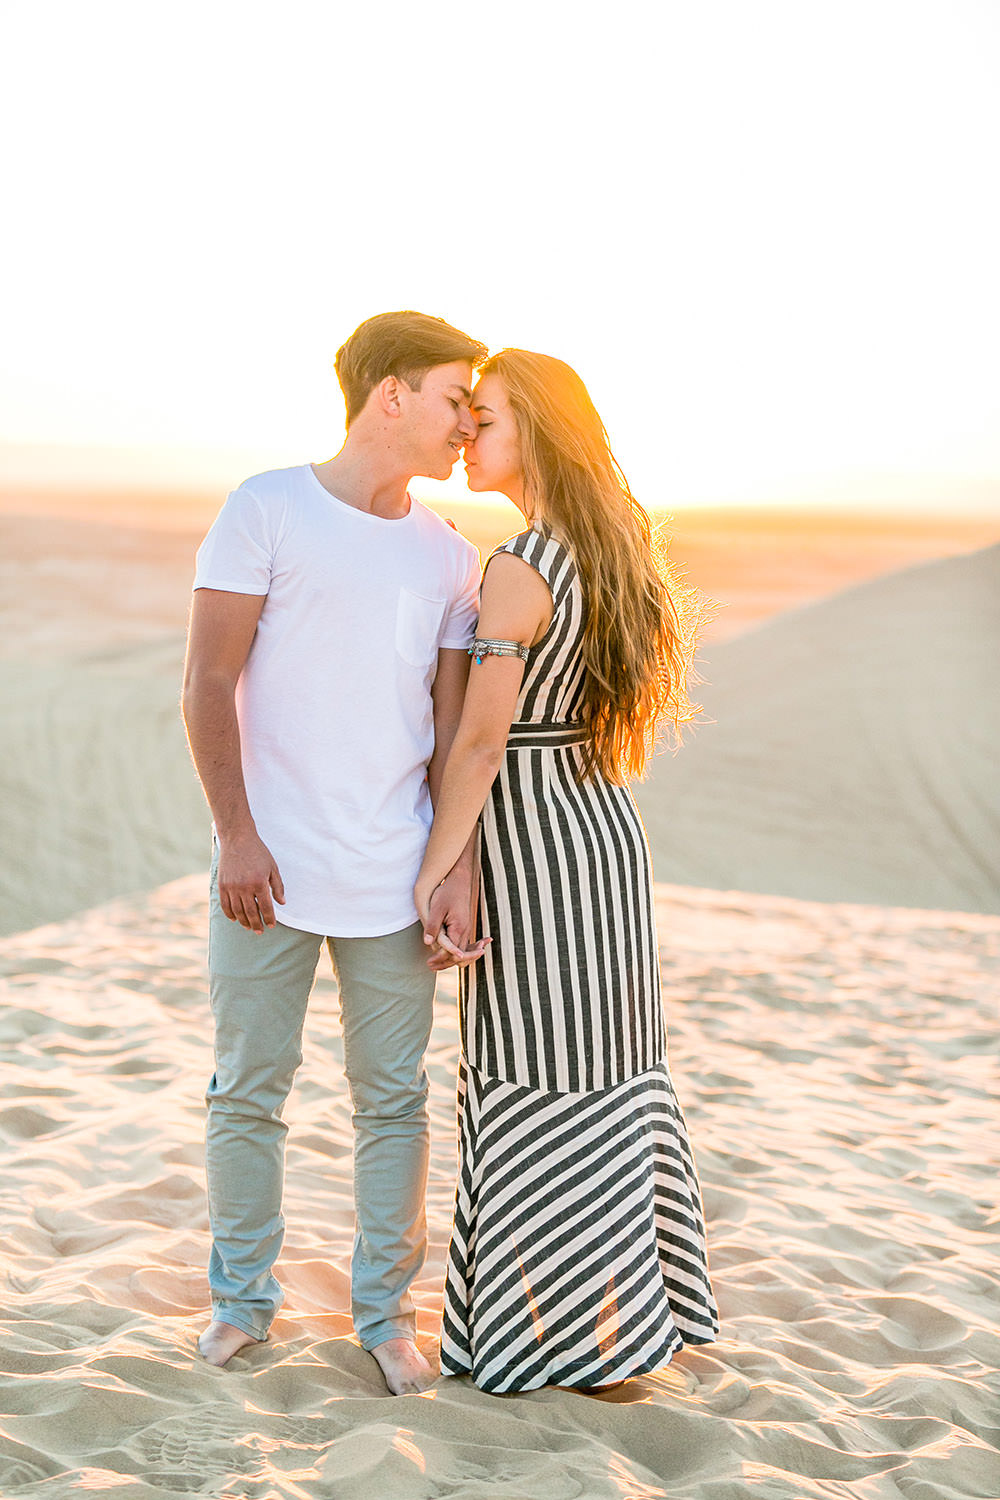 Engagement session at the Sand Dunes in Southern California